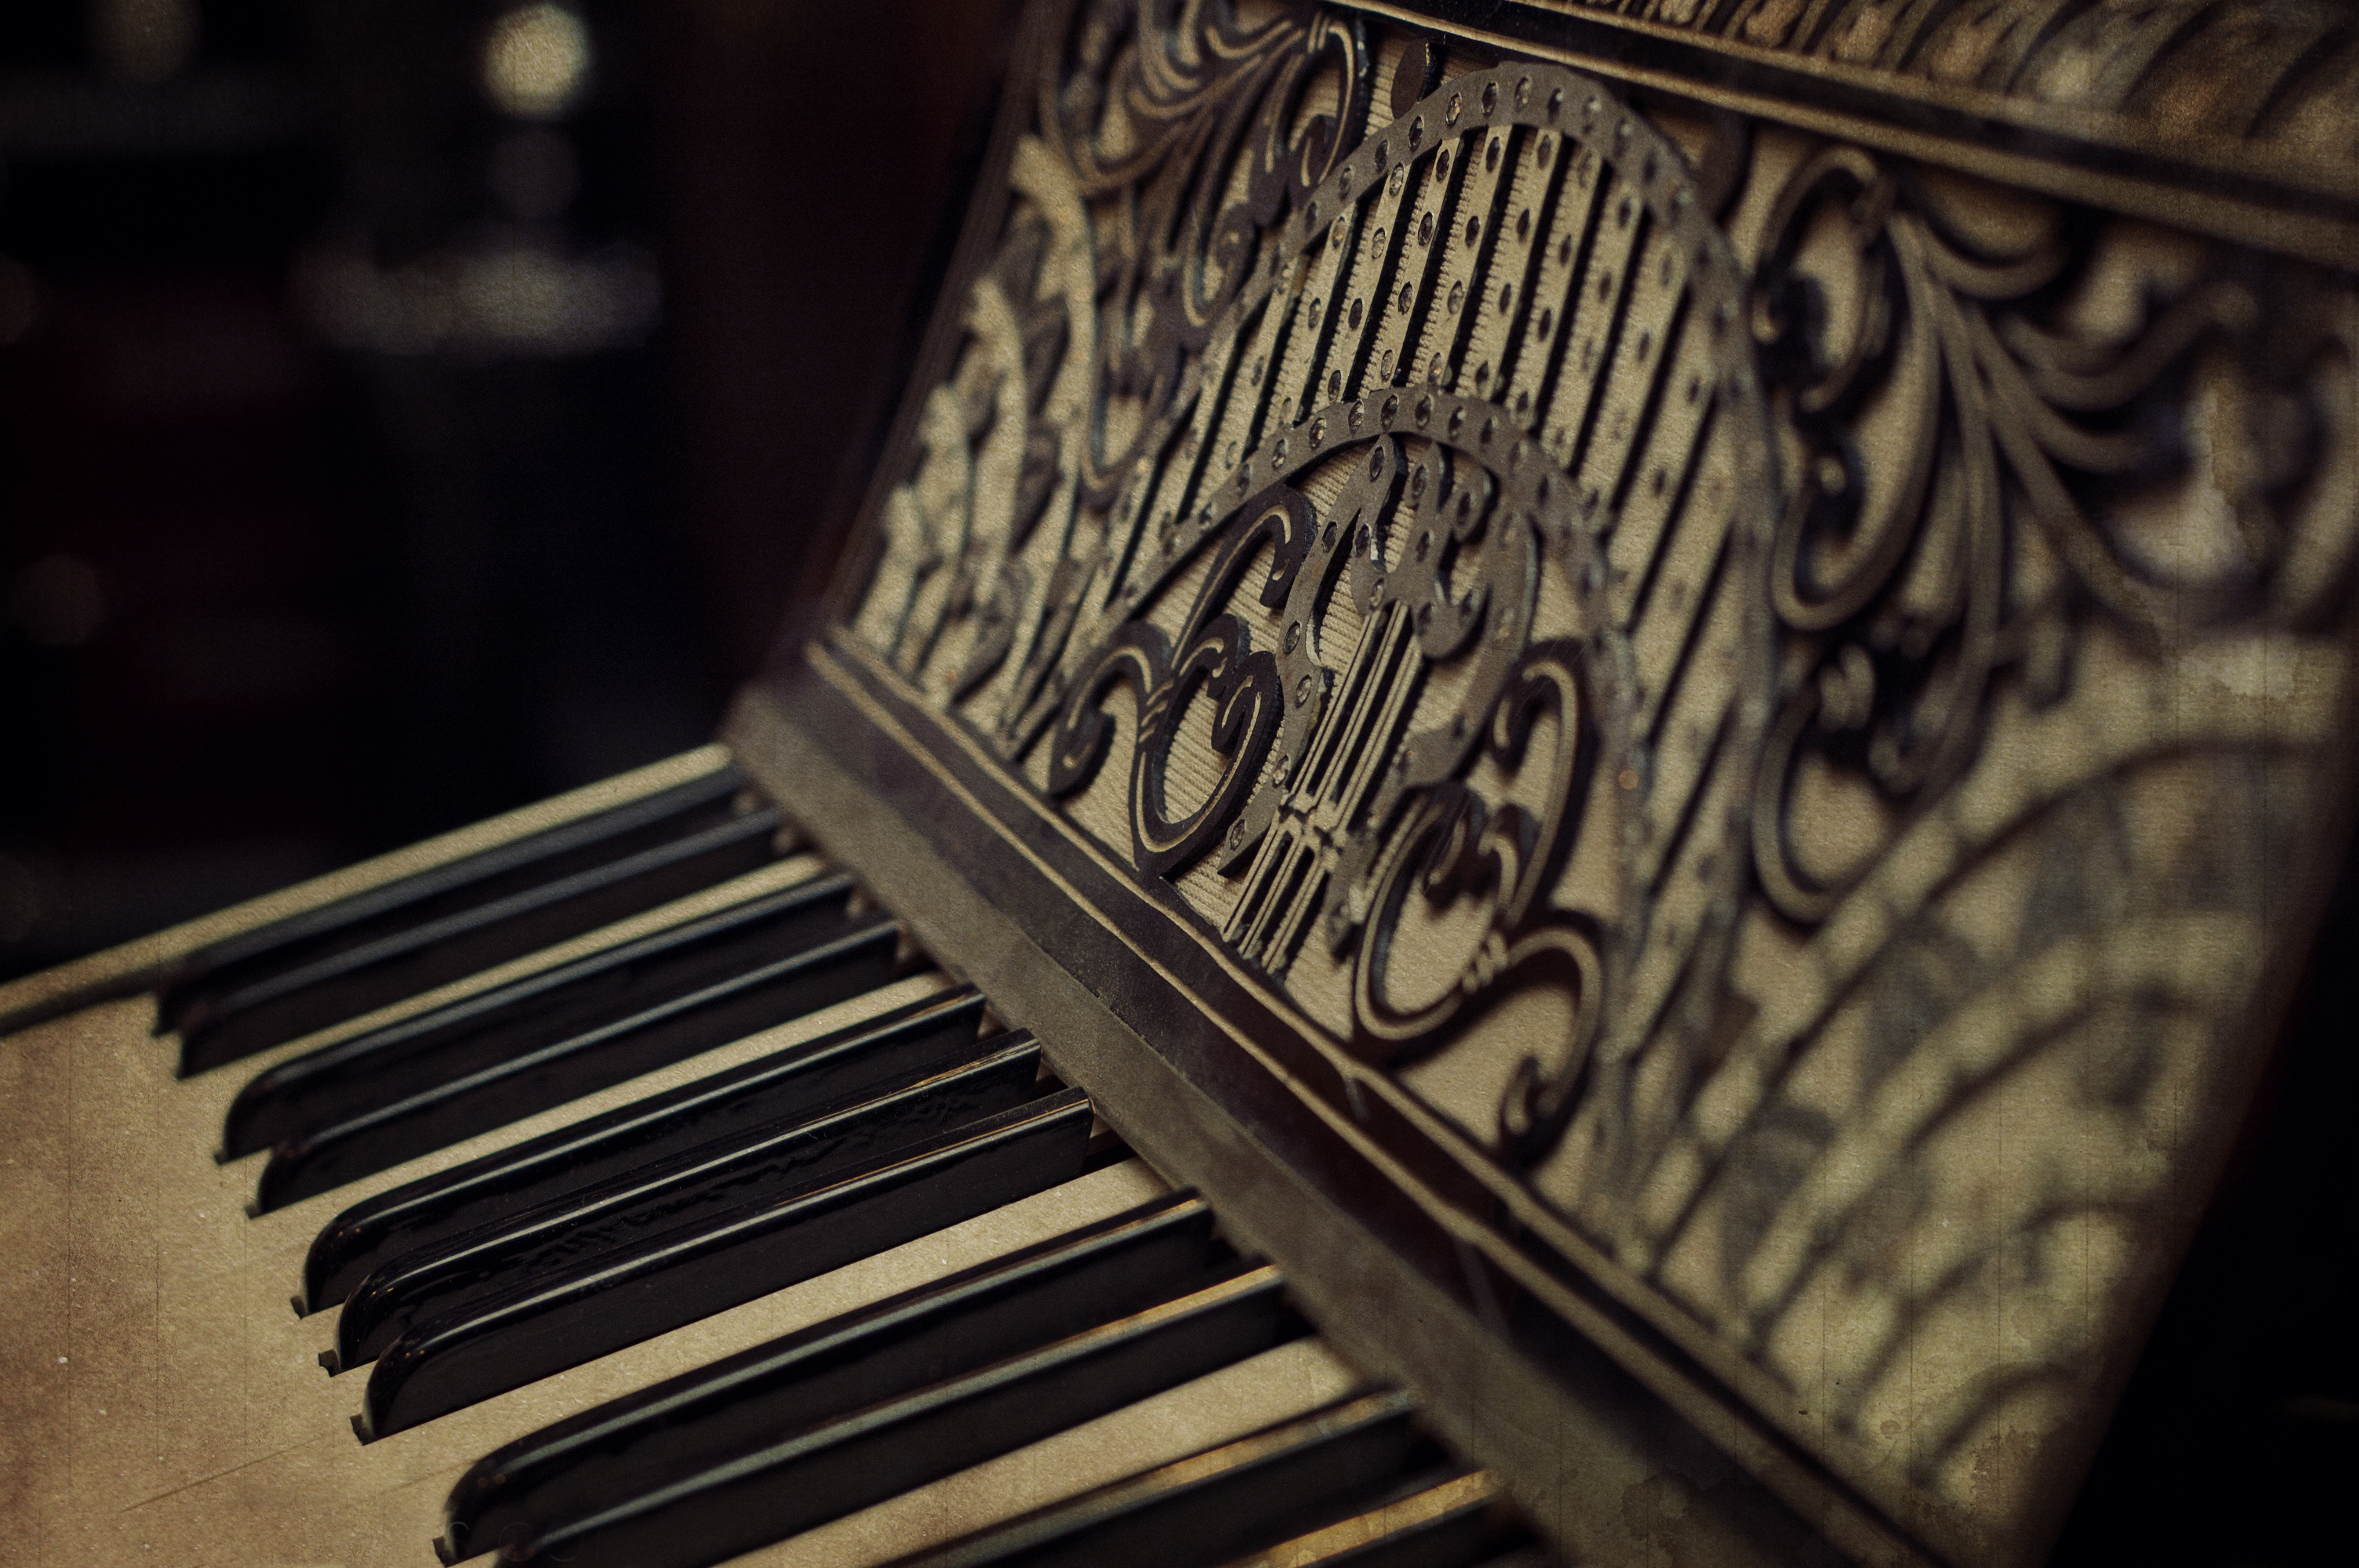 Grand Piano: Music instrument with a row of keys that the performer presses down or strikes with the fingers and thumbs. 3010x2000 HD Wallpaper.